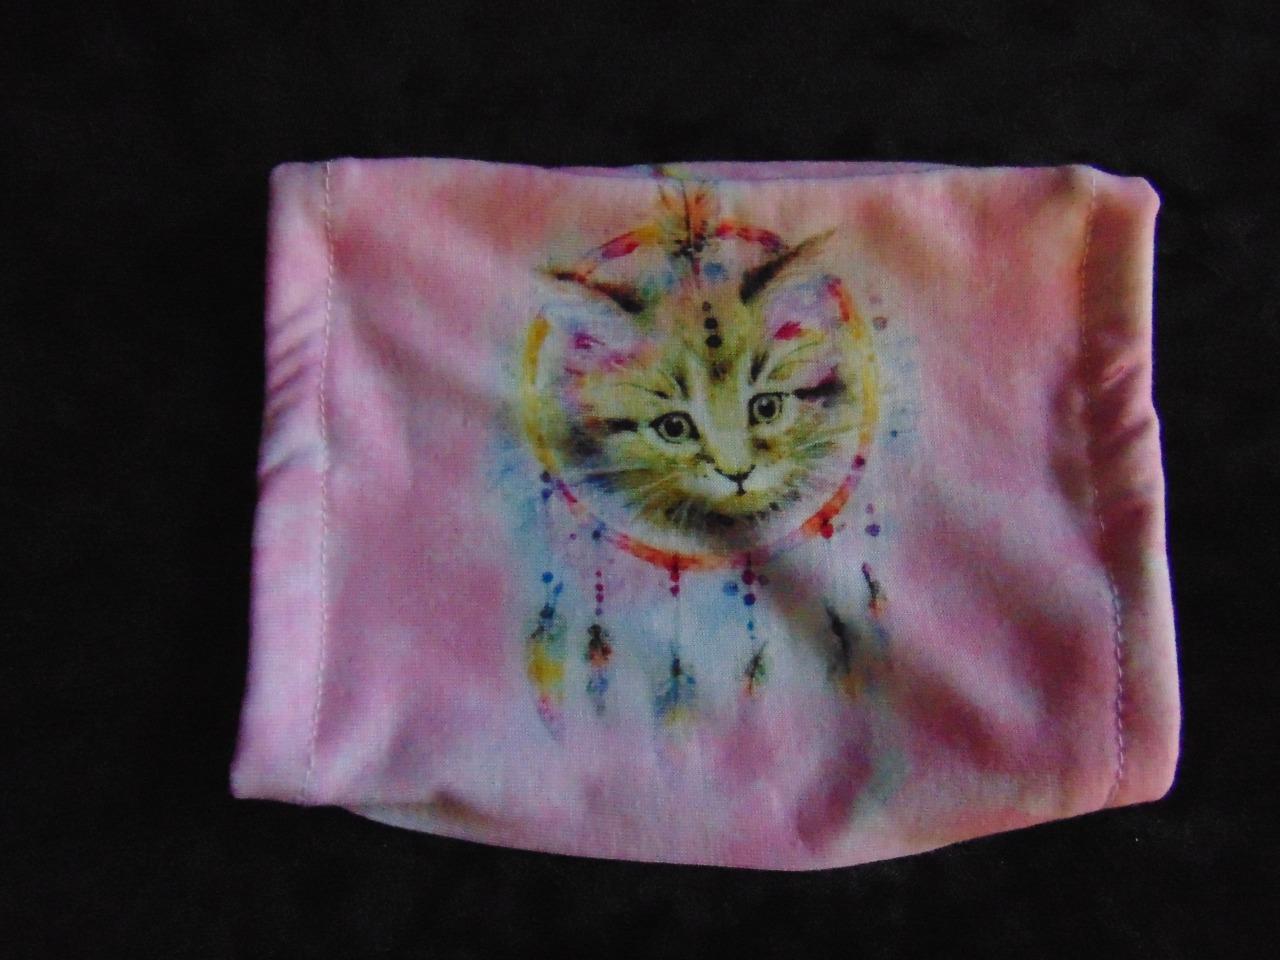 DREAM CATCHER KITTY PRINTED SOFT COTTON KNIT FACE MASK FROM PAWS & PALS - Picture 1 of 1